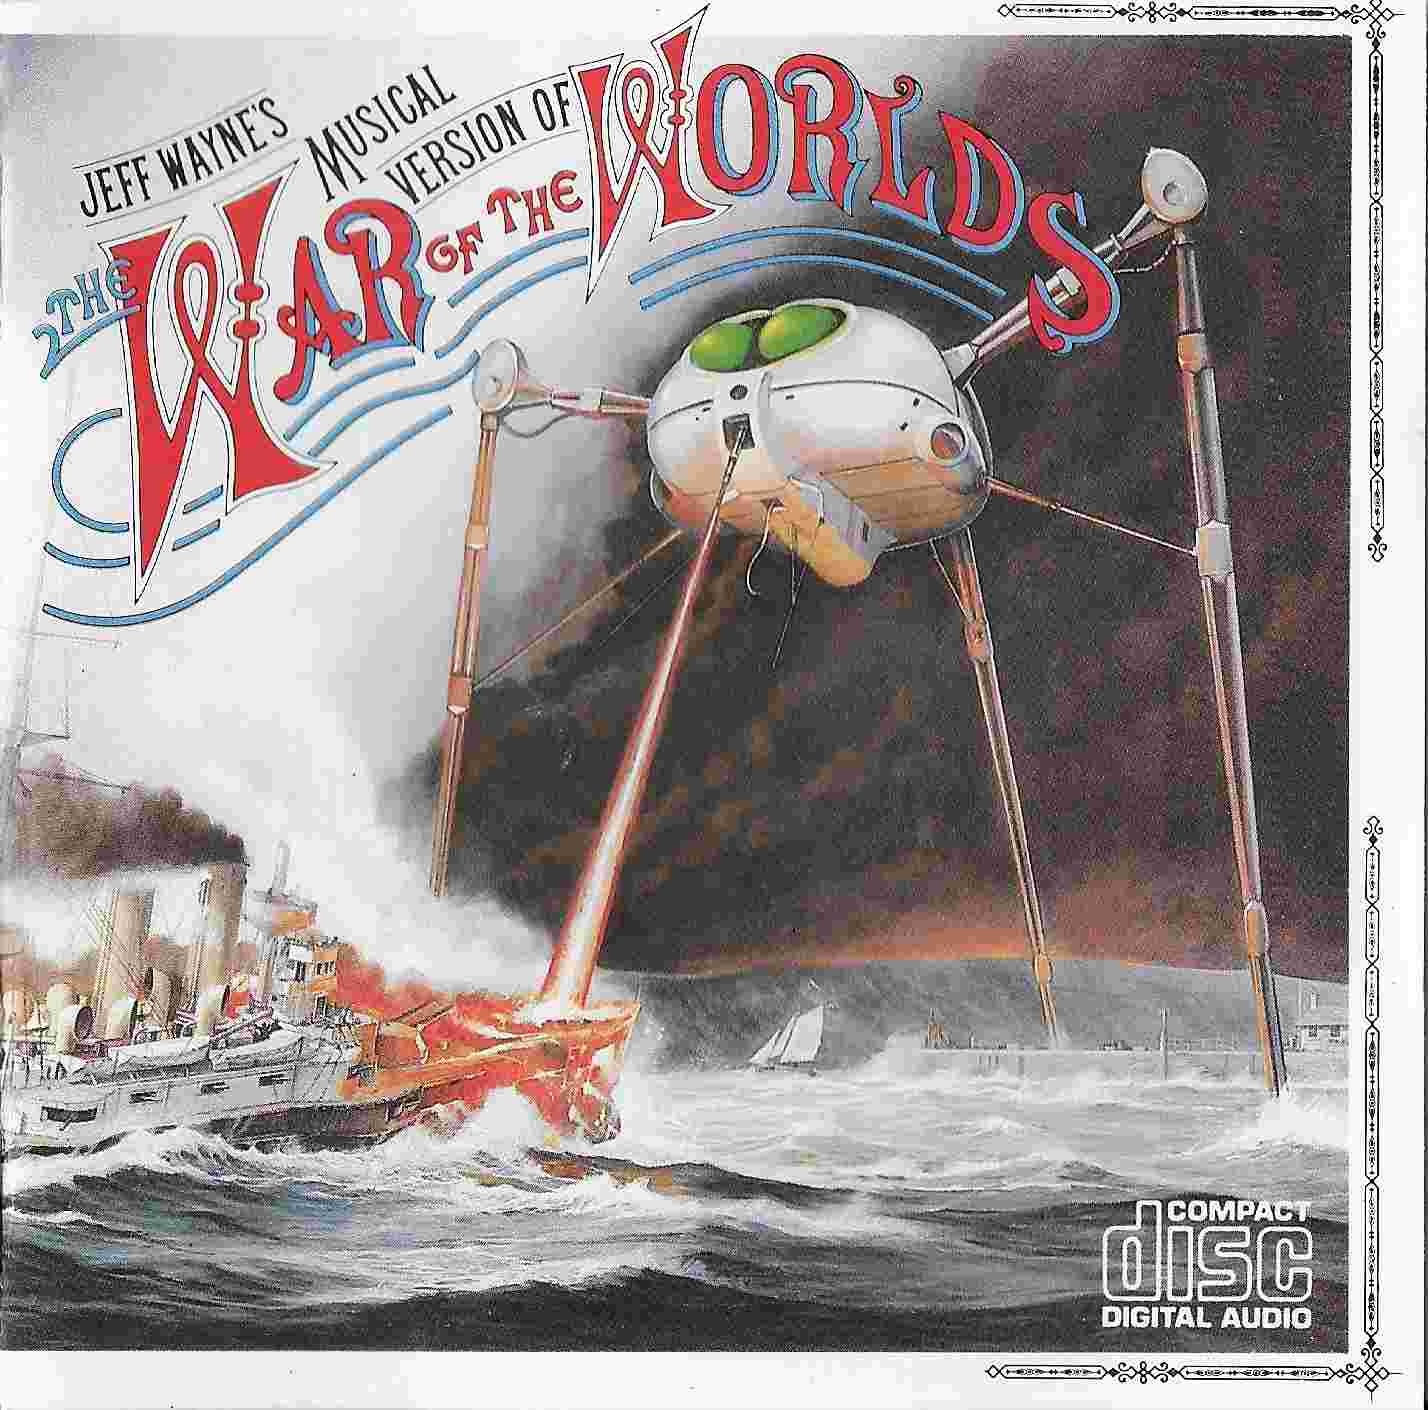 Picture of CDCBS 96000 War of the Worlds by artist Jeff Wayne from ITV, Channel 4 and Channel 5 cds library